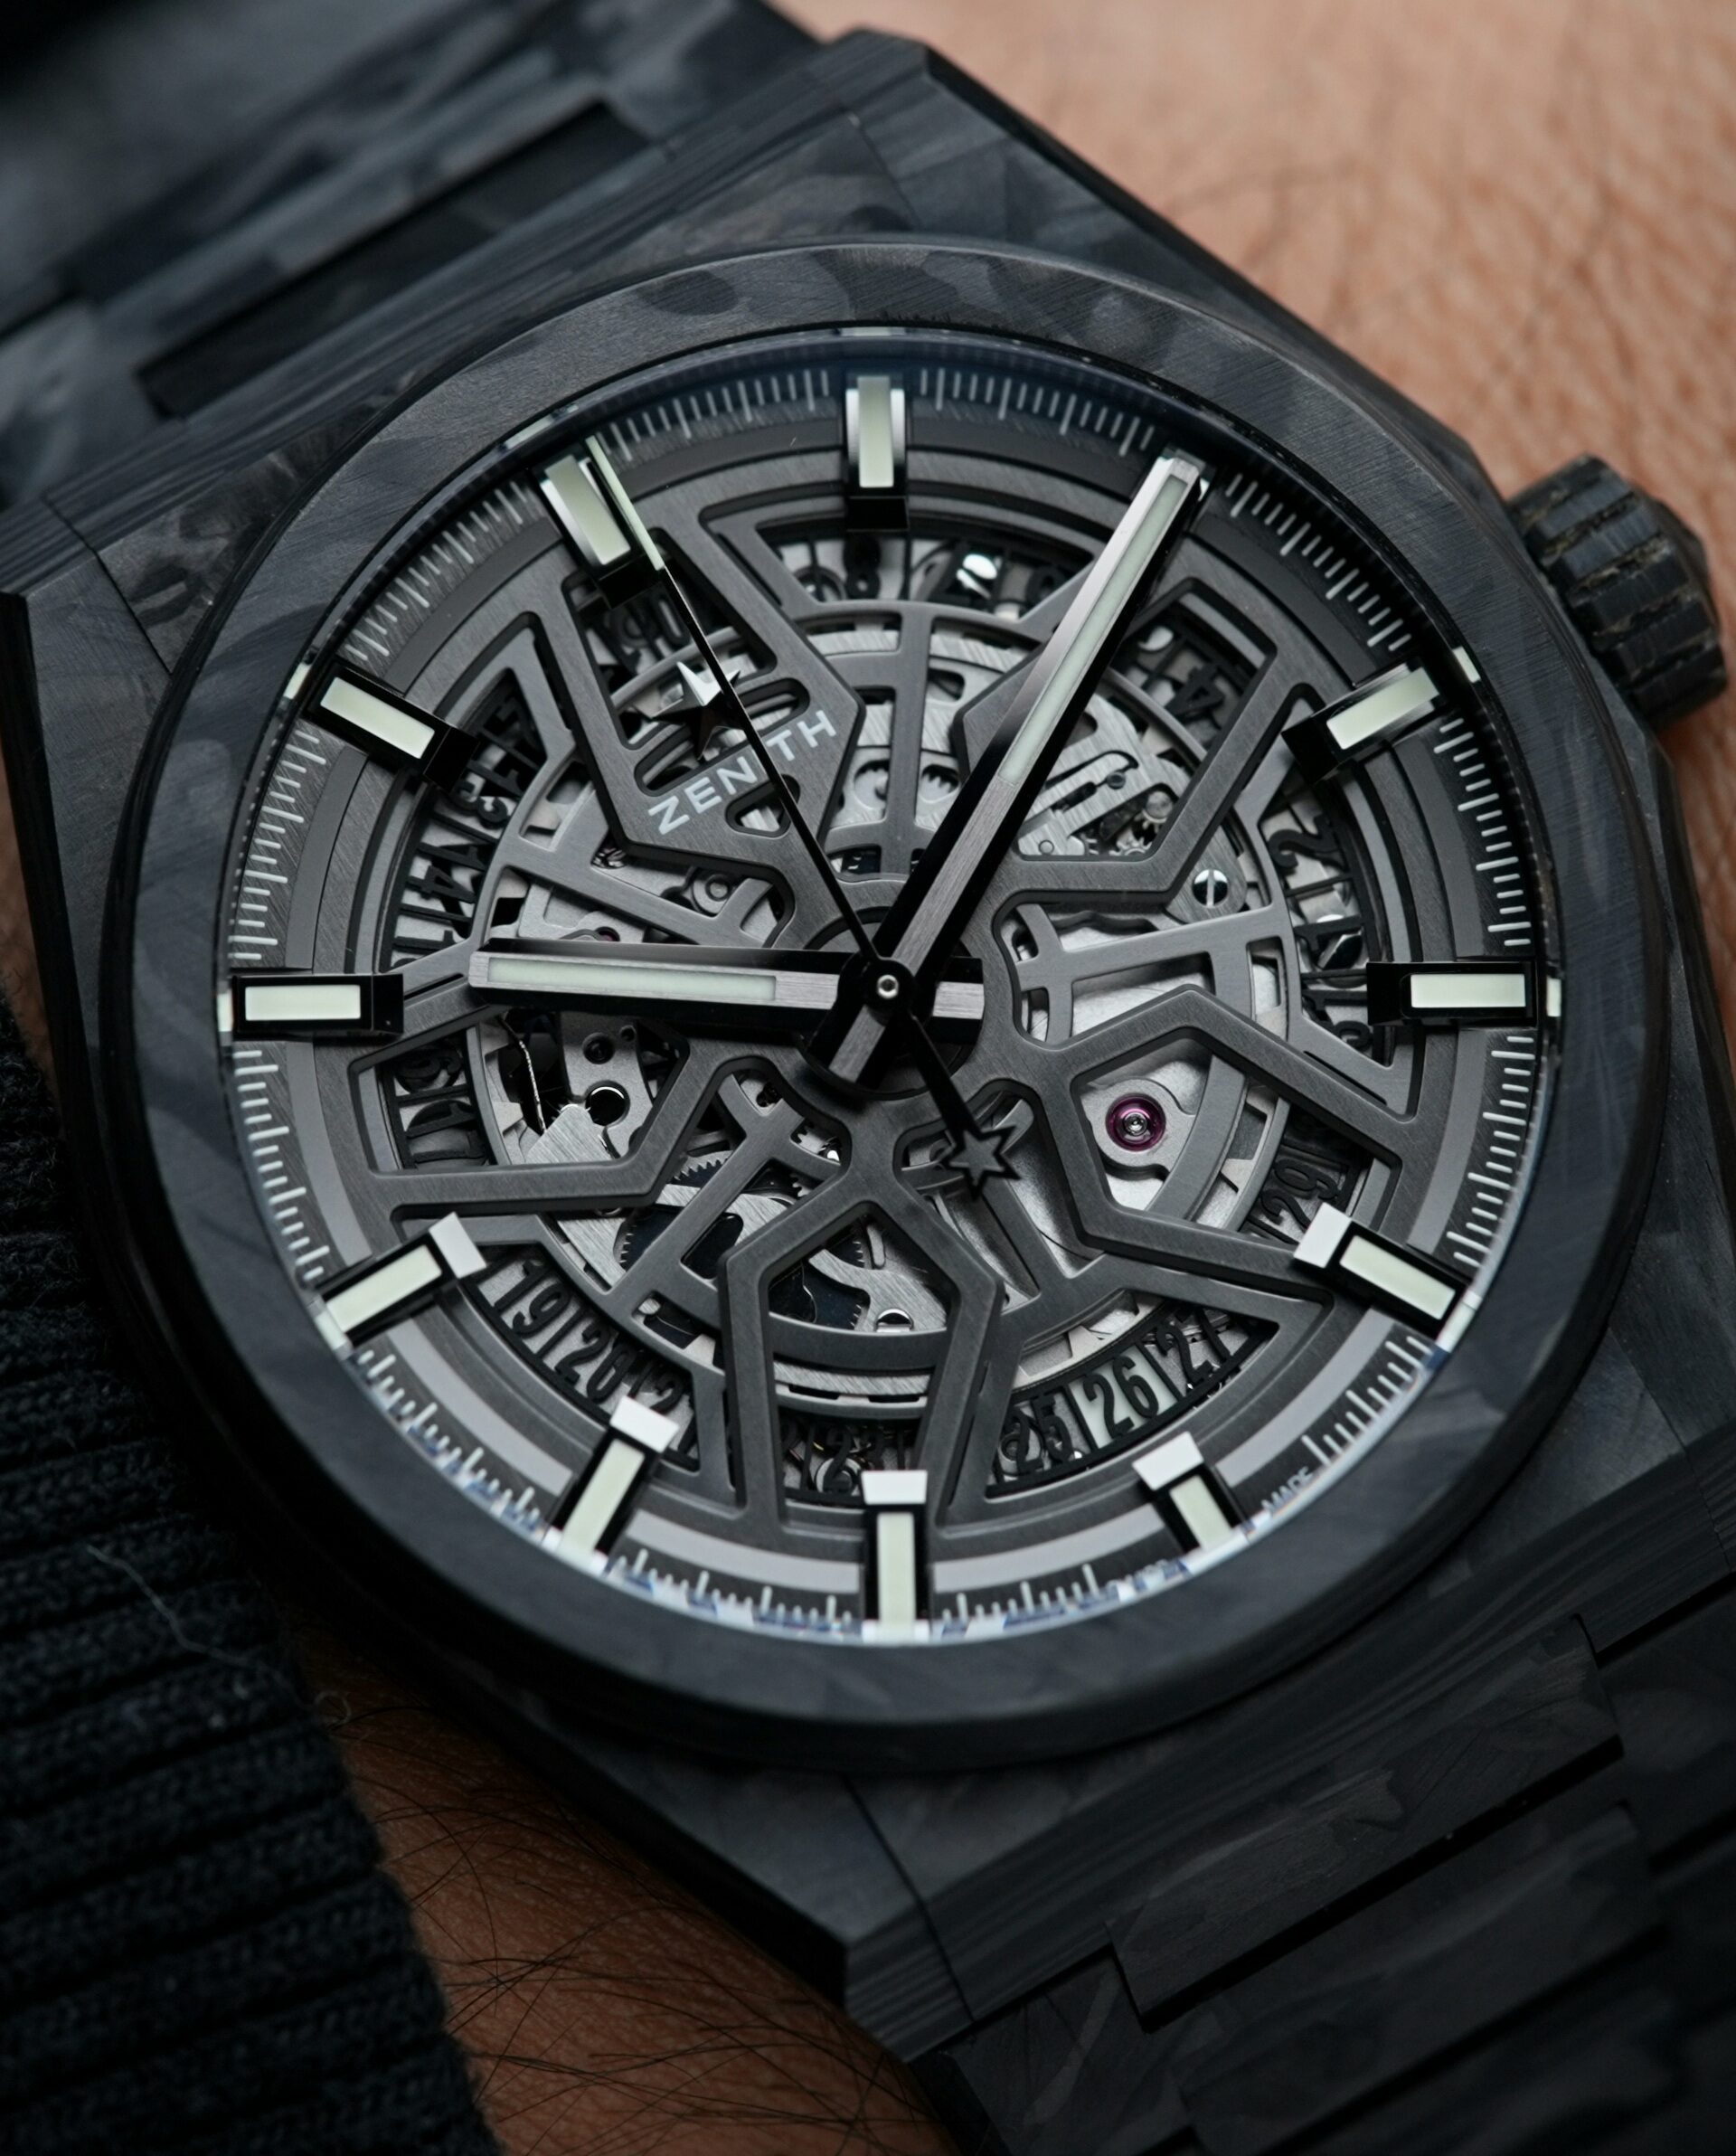 Zenith Defy Classic Carbon Fiber watch featured on the wrist.